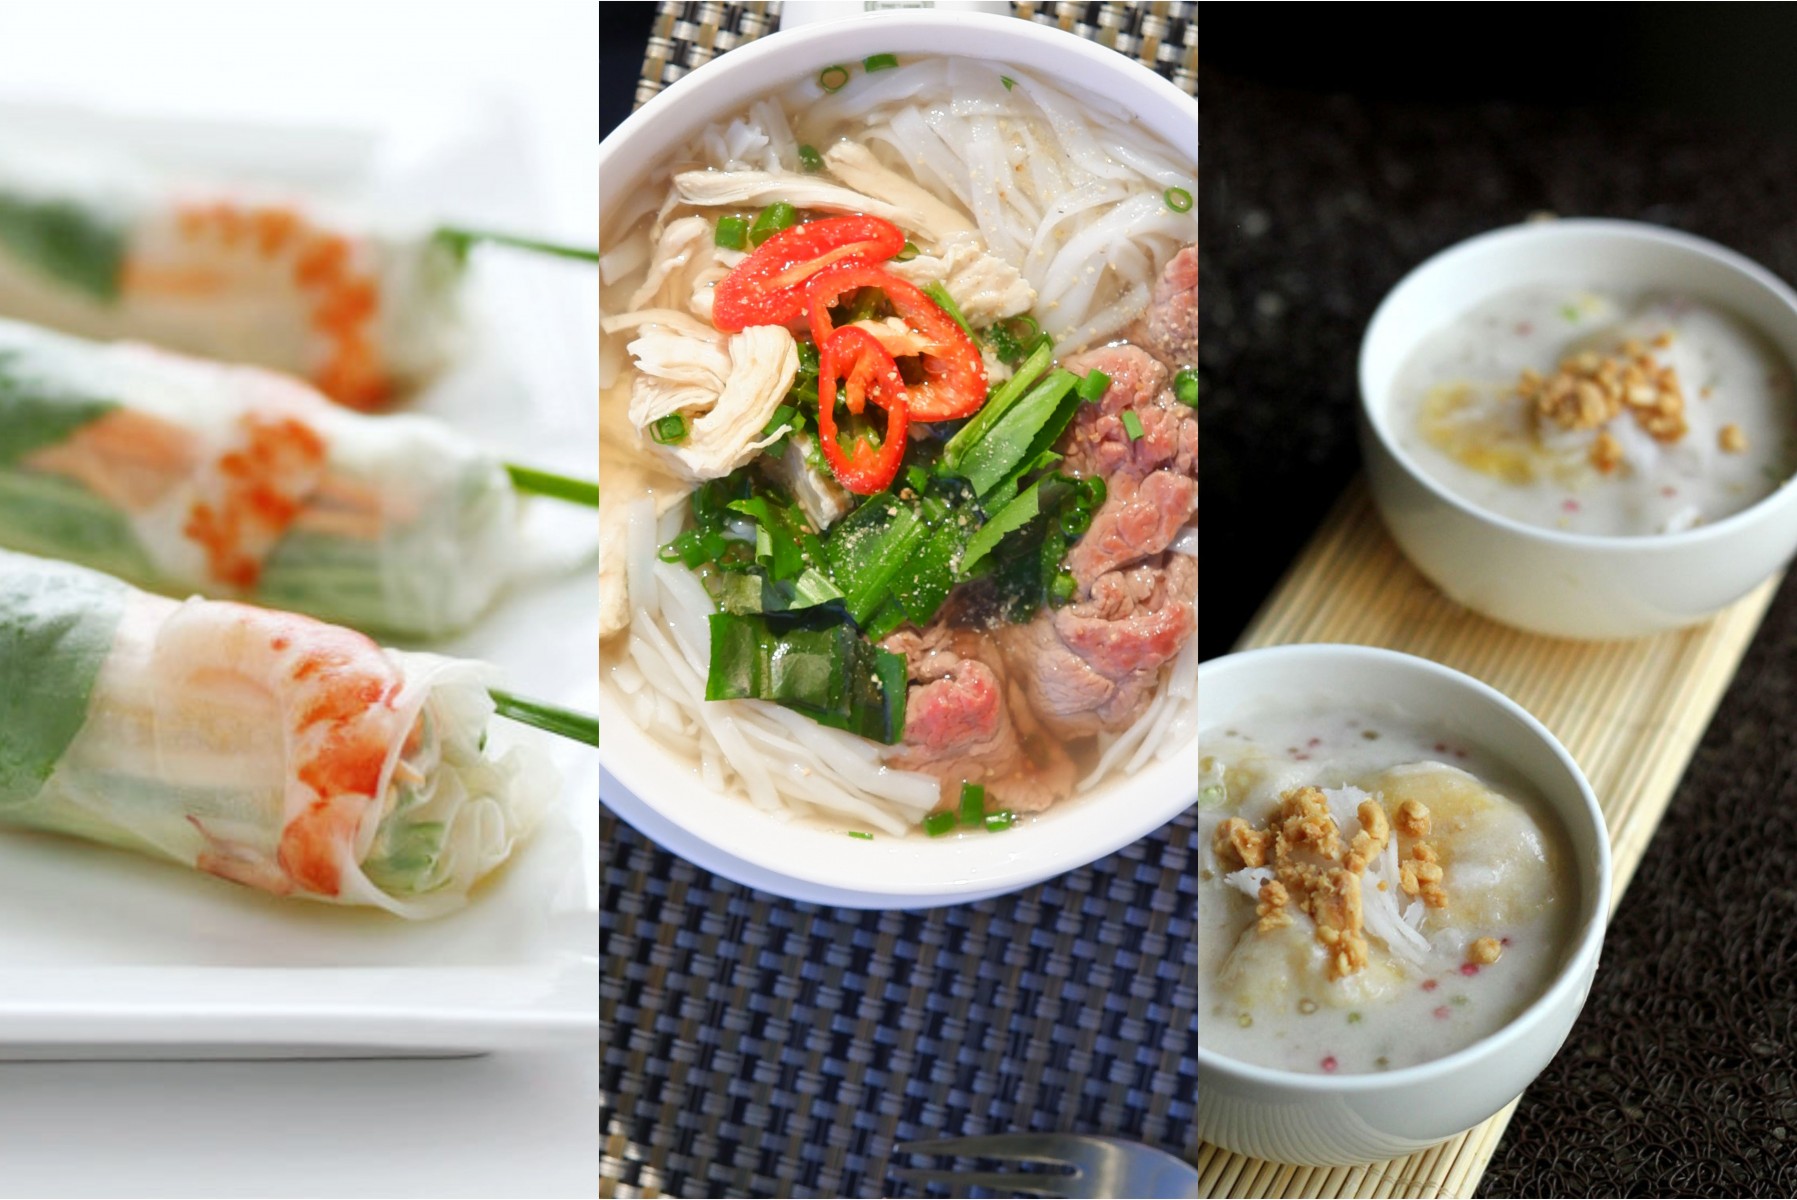 Vietnamese spring rollsaromatic bowl of pho (noodle soup) or fried rice with fresh seafood. 